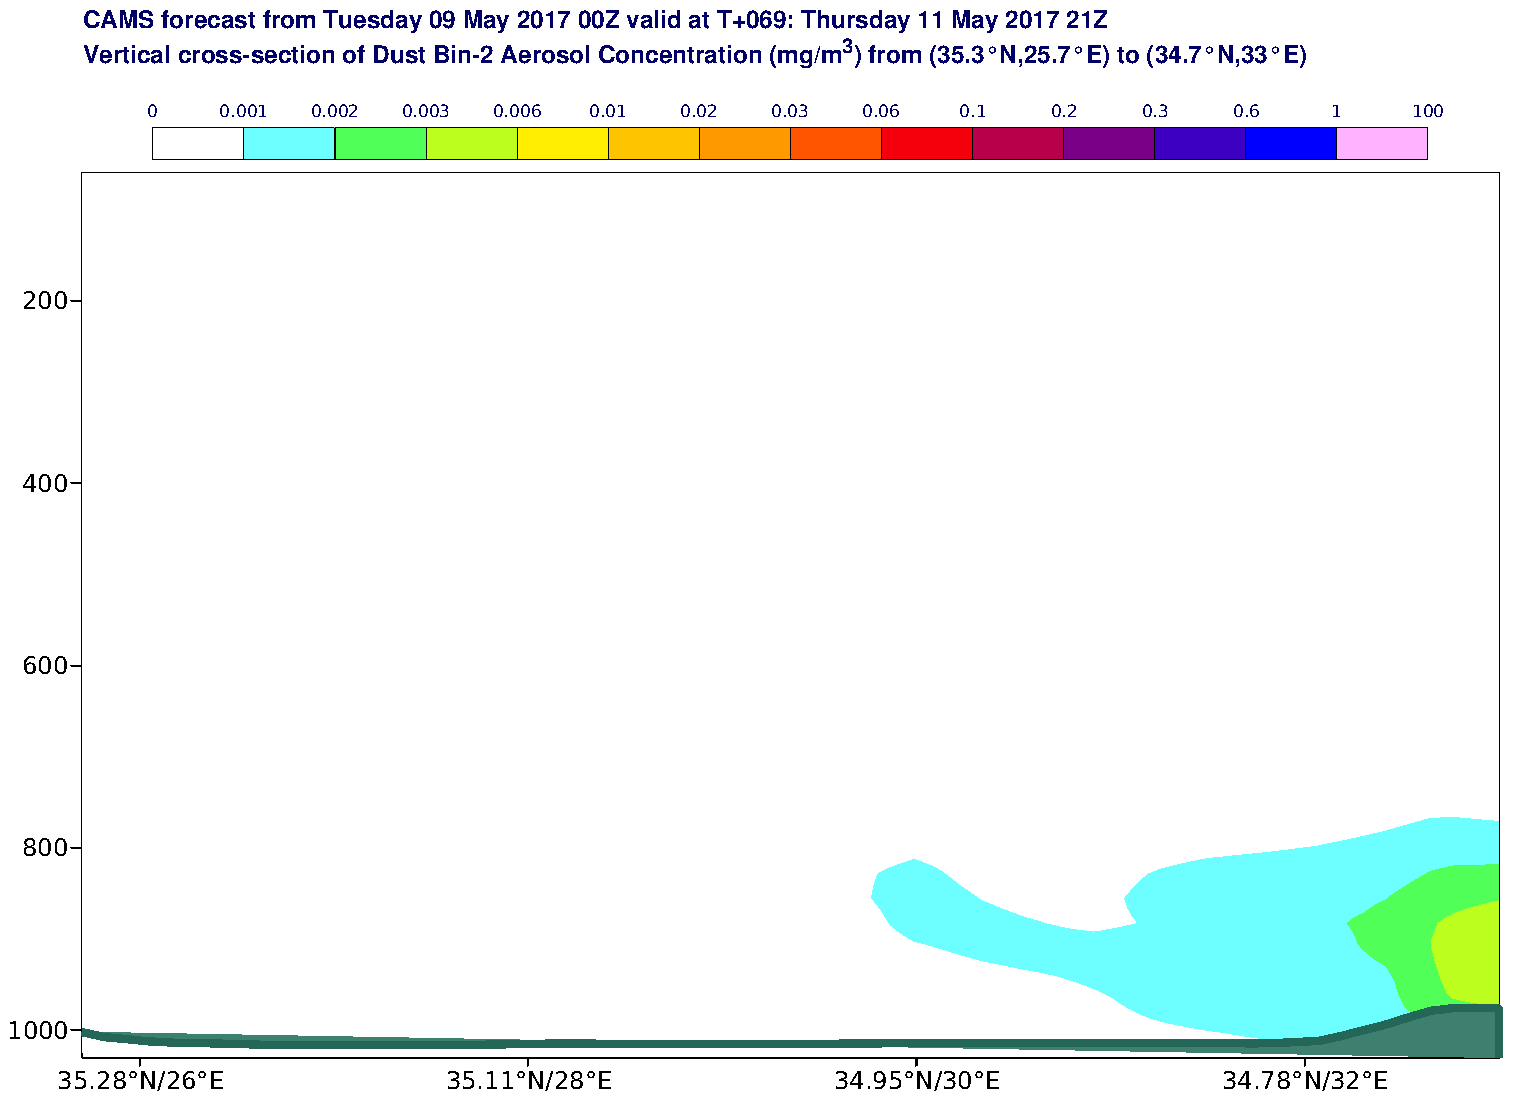 Vertical cross-section of Dust Bin-2 Aerosol Concentration (mg/m3) valid at T69 - 2017-05-11 21:00